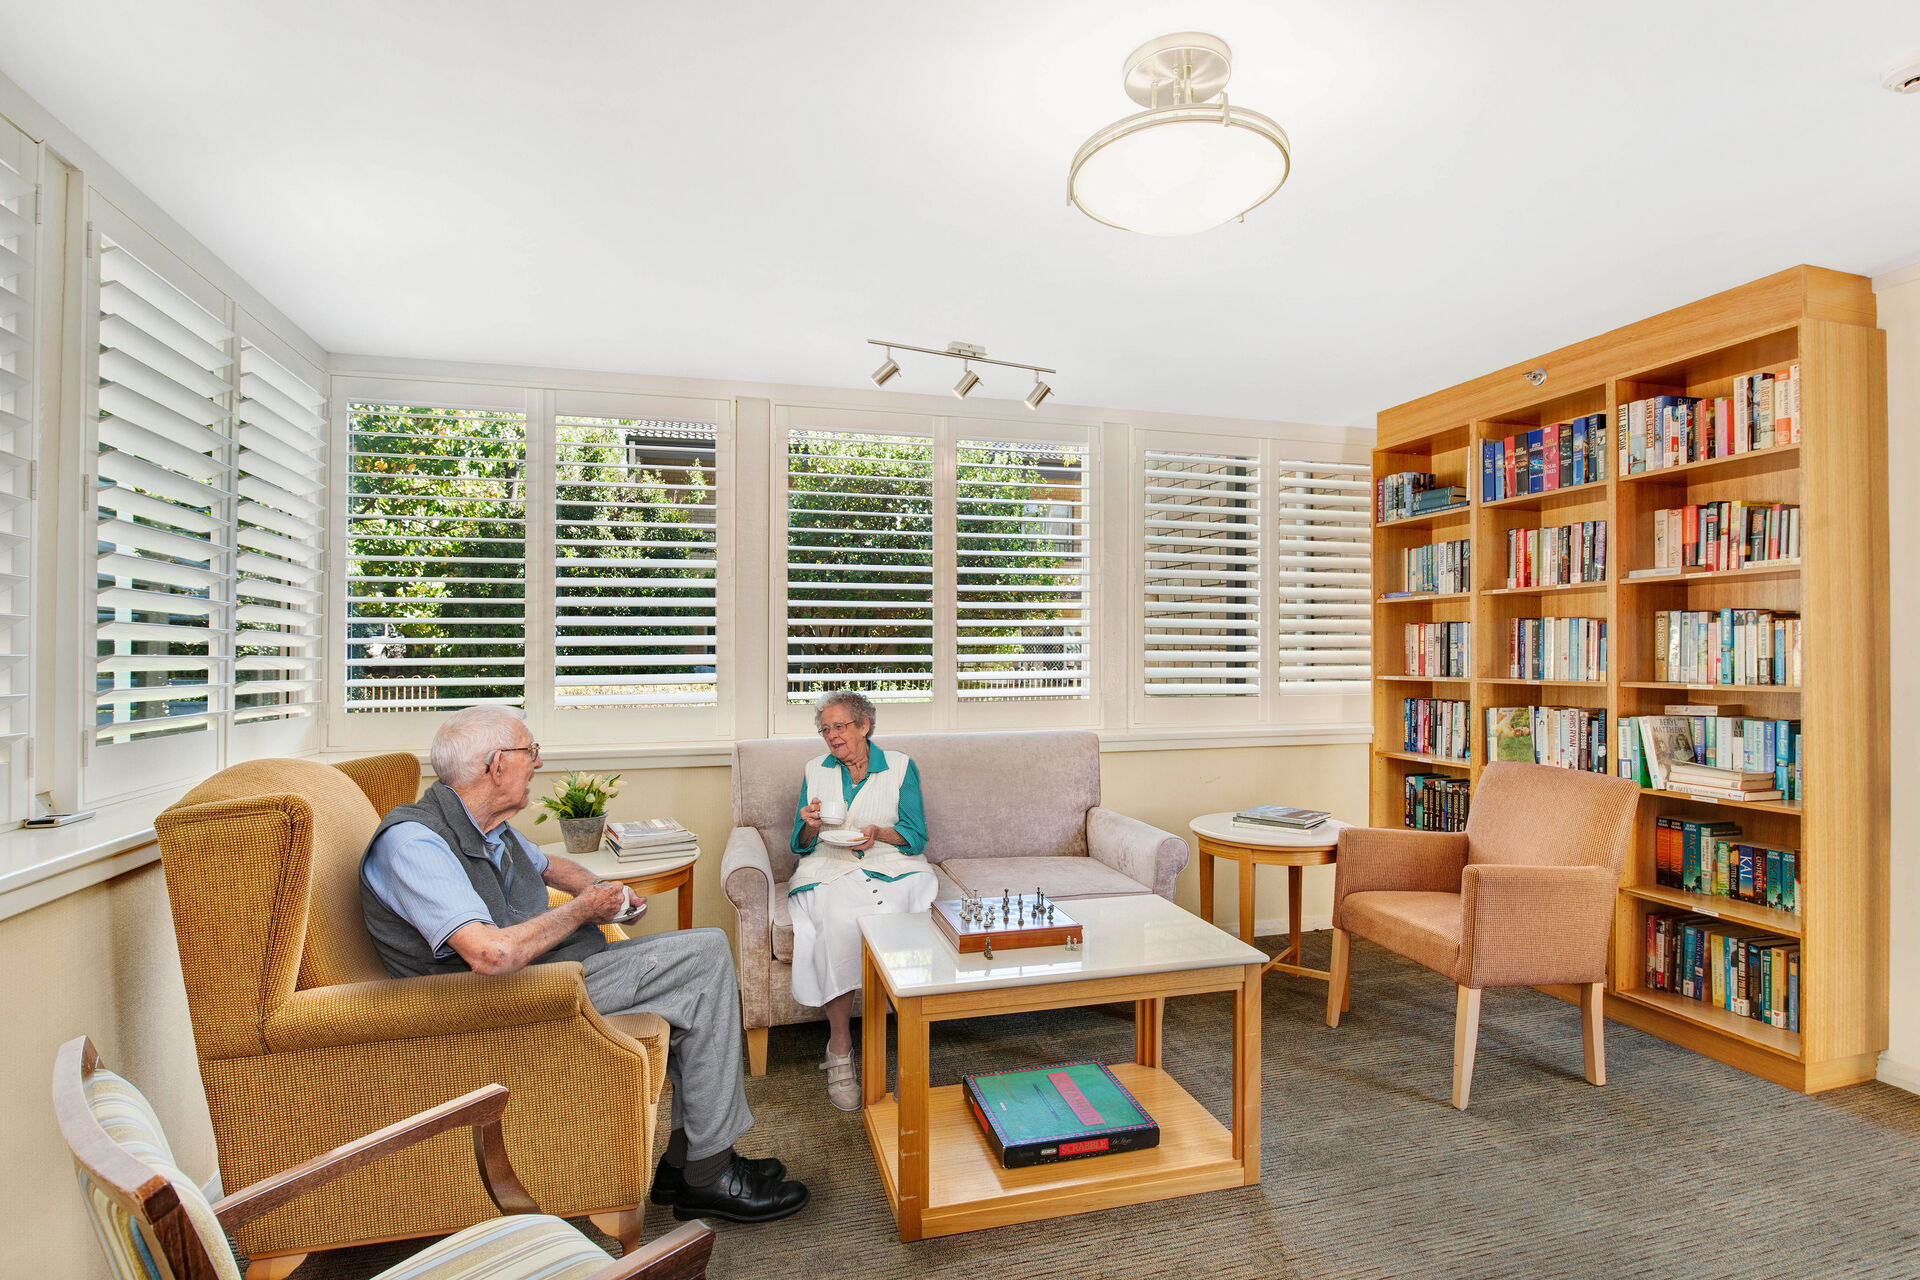 welcoming library for aged care residents at baptistcare cooinda court residential aged care home in macquarie park northern sydney